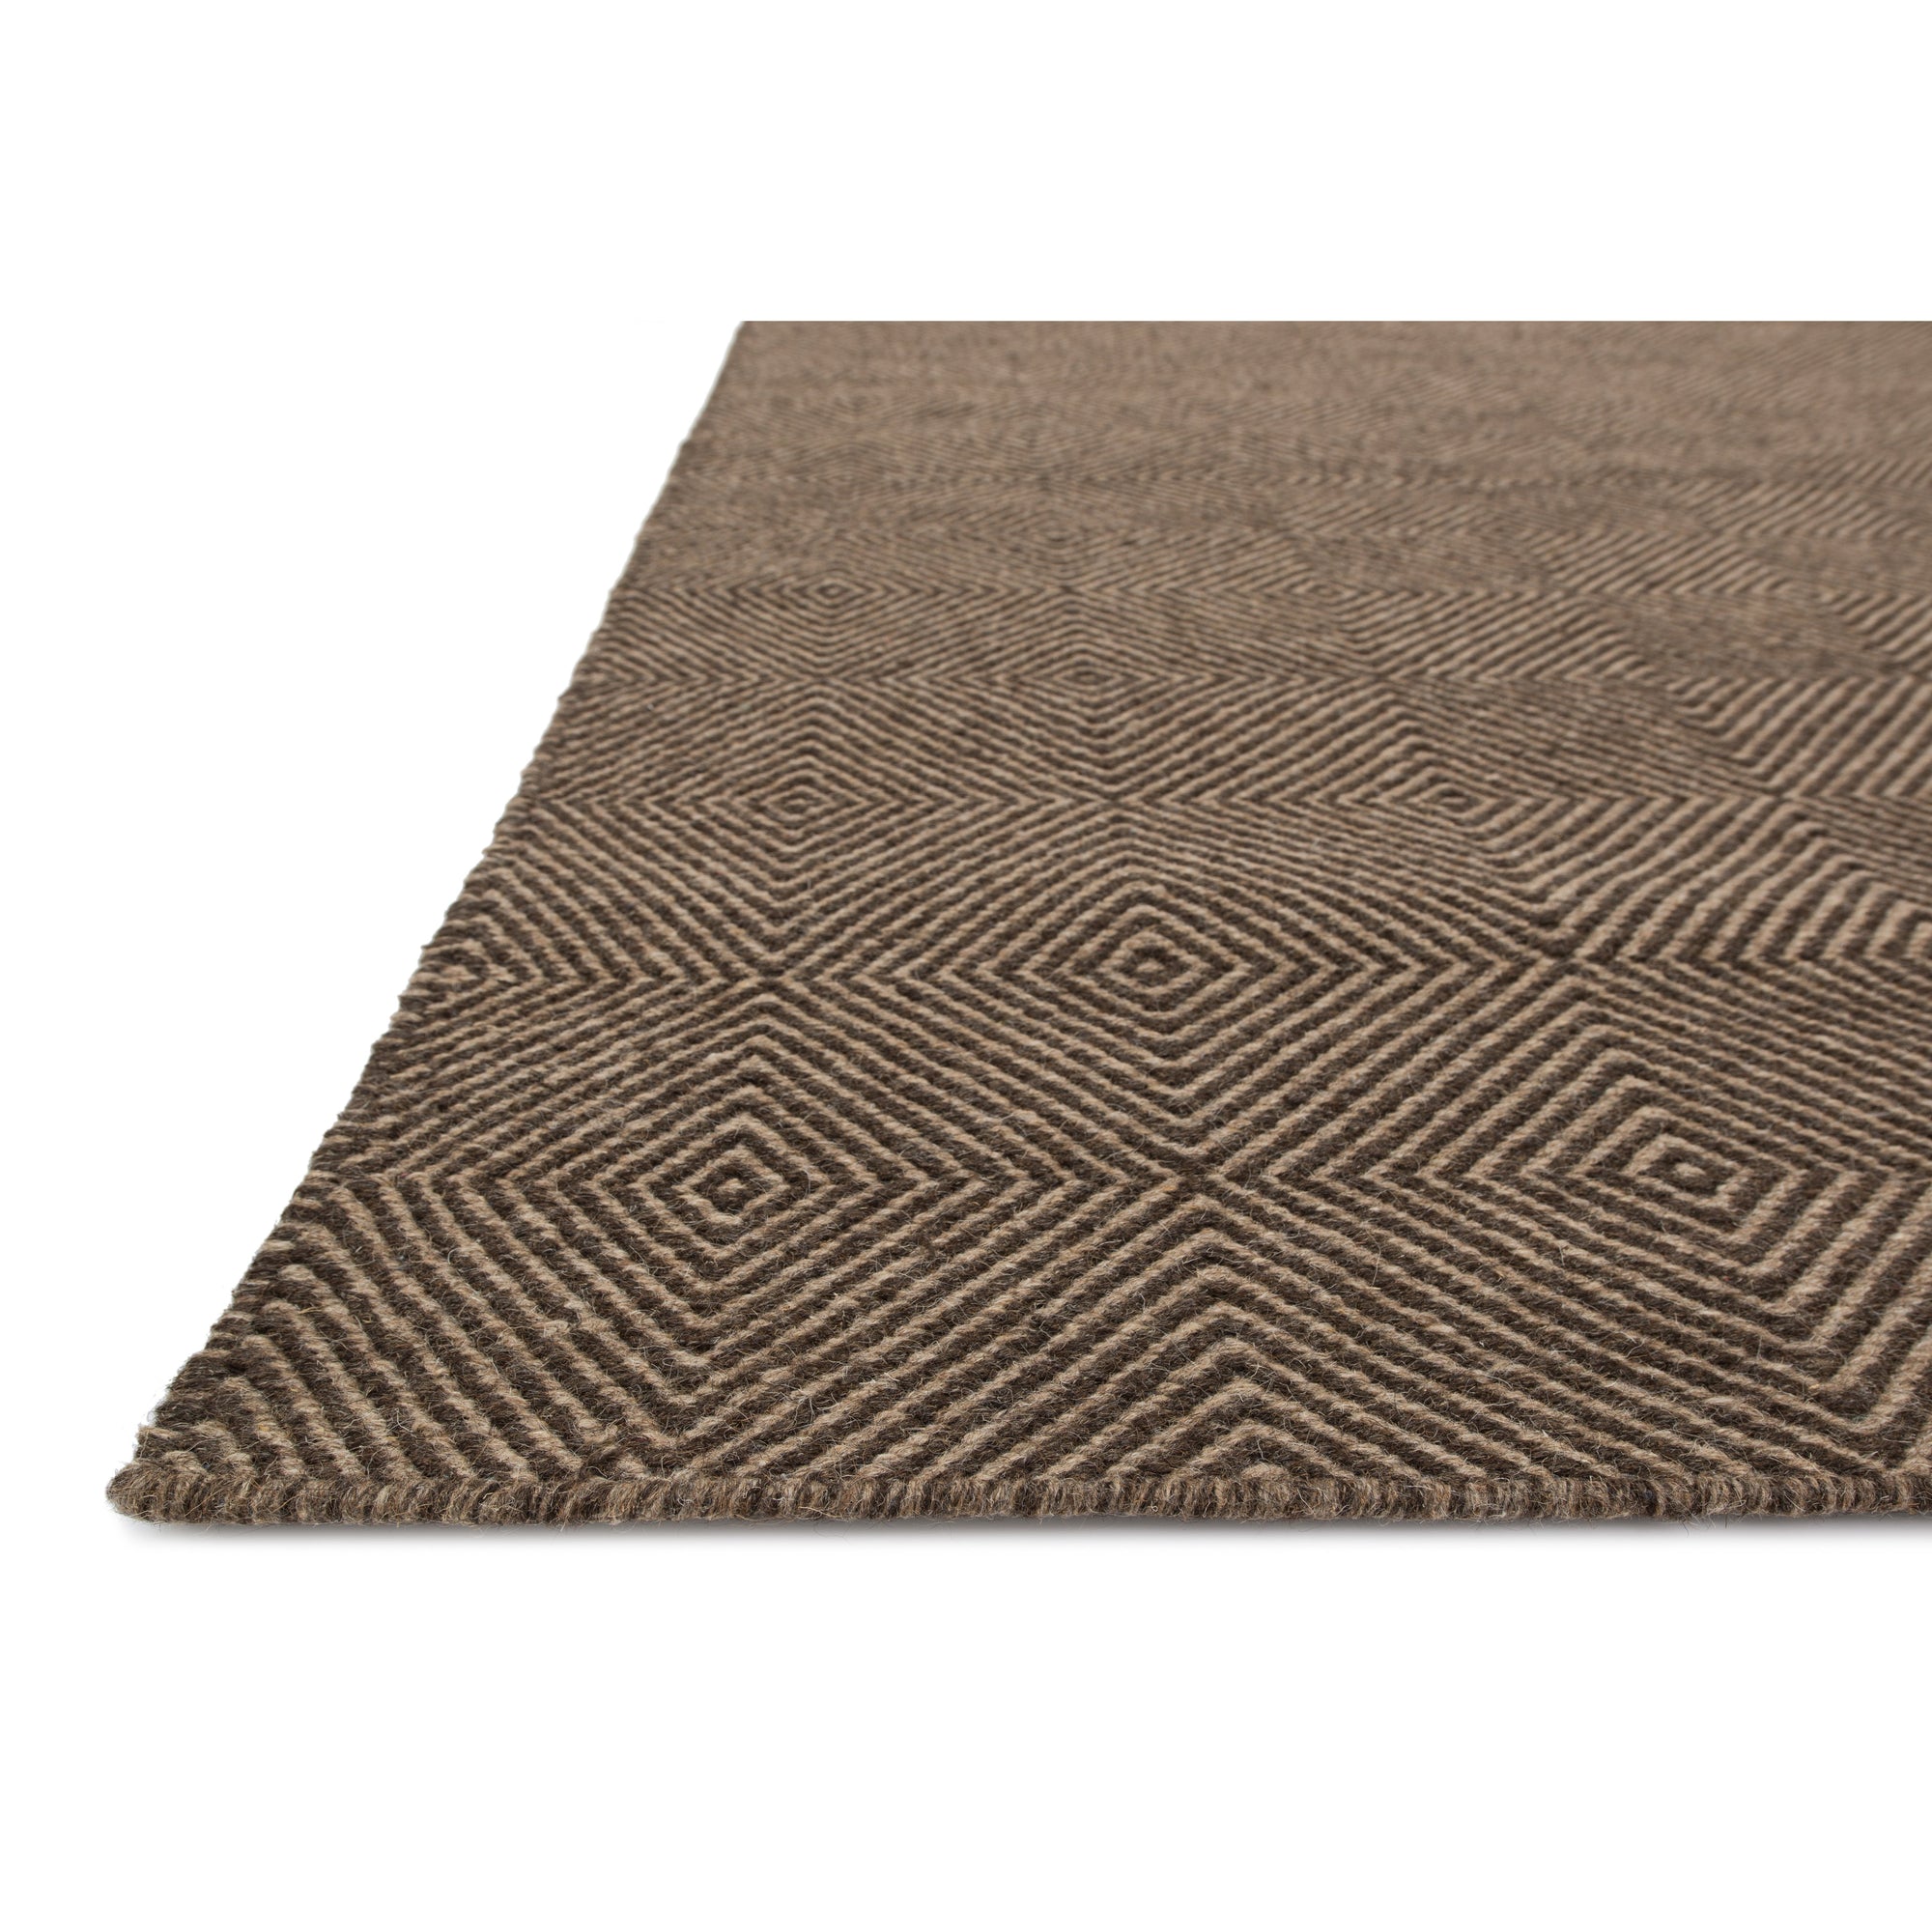 Rugs by Roo Loloi Oakwood Dune Area Rug in size 3' 6" x 5' 6"